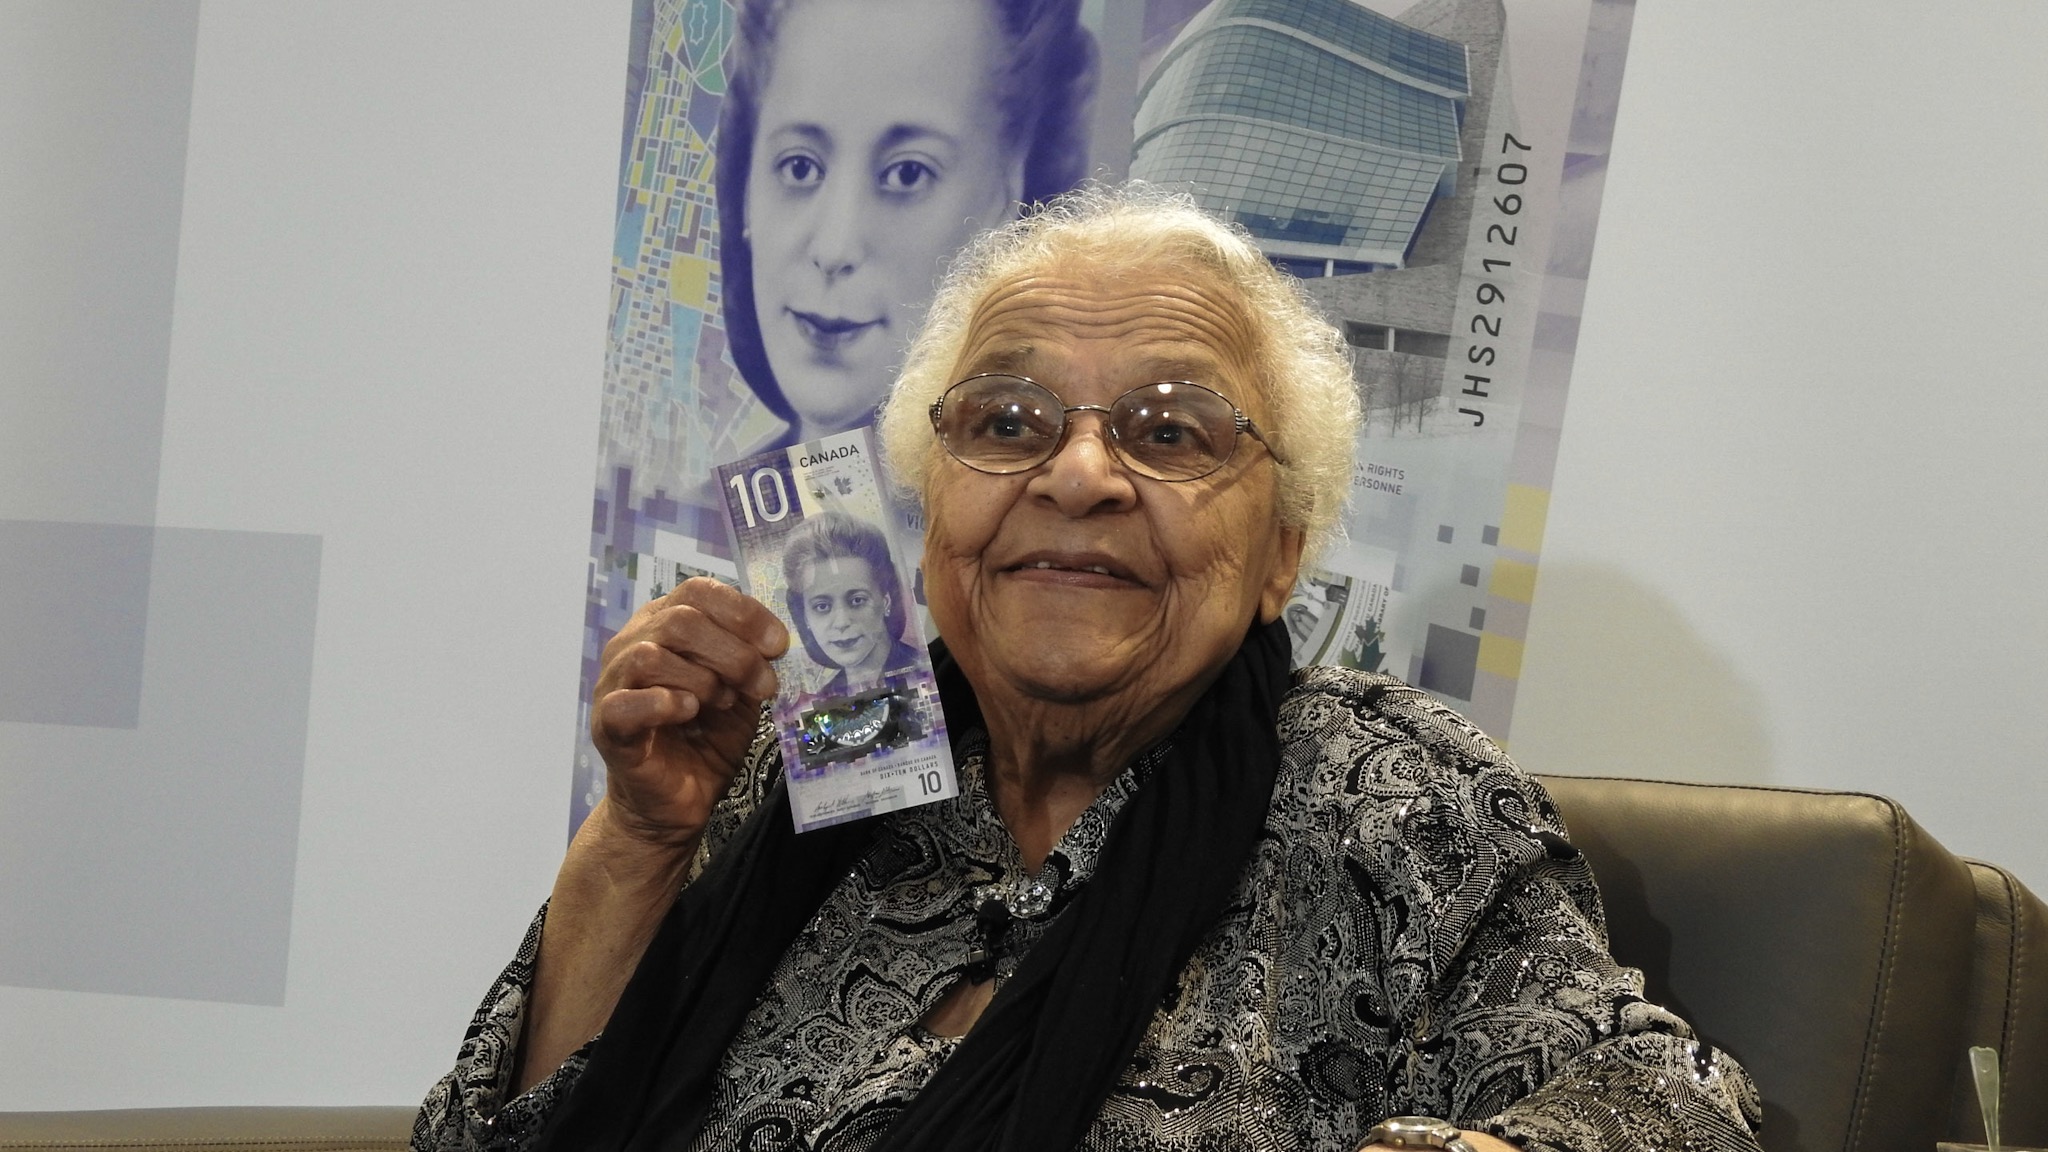 Wanda Robson poses with the $10 bill featuring a portrait of her sister.